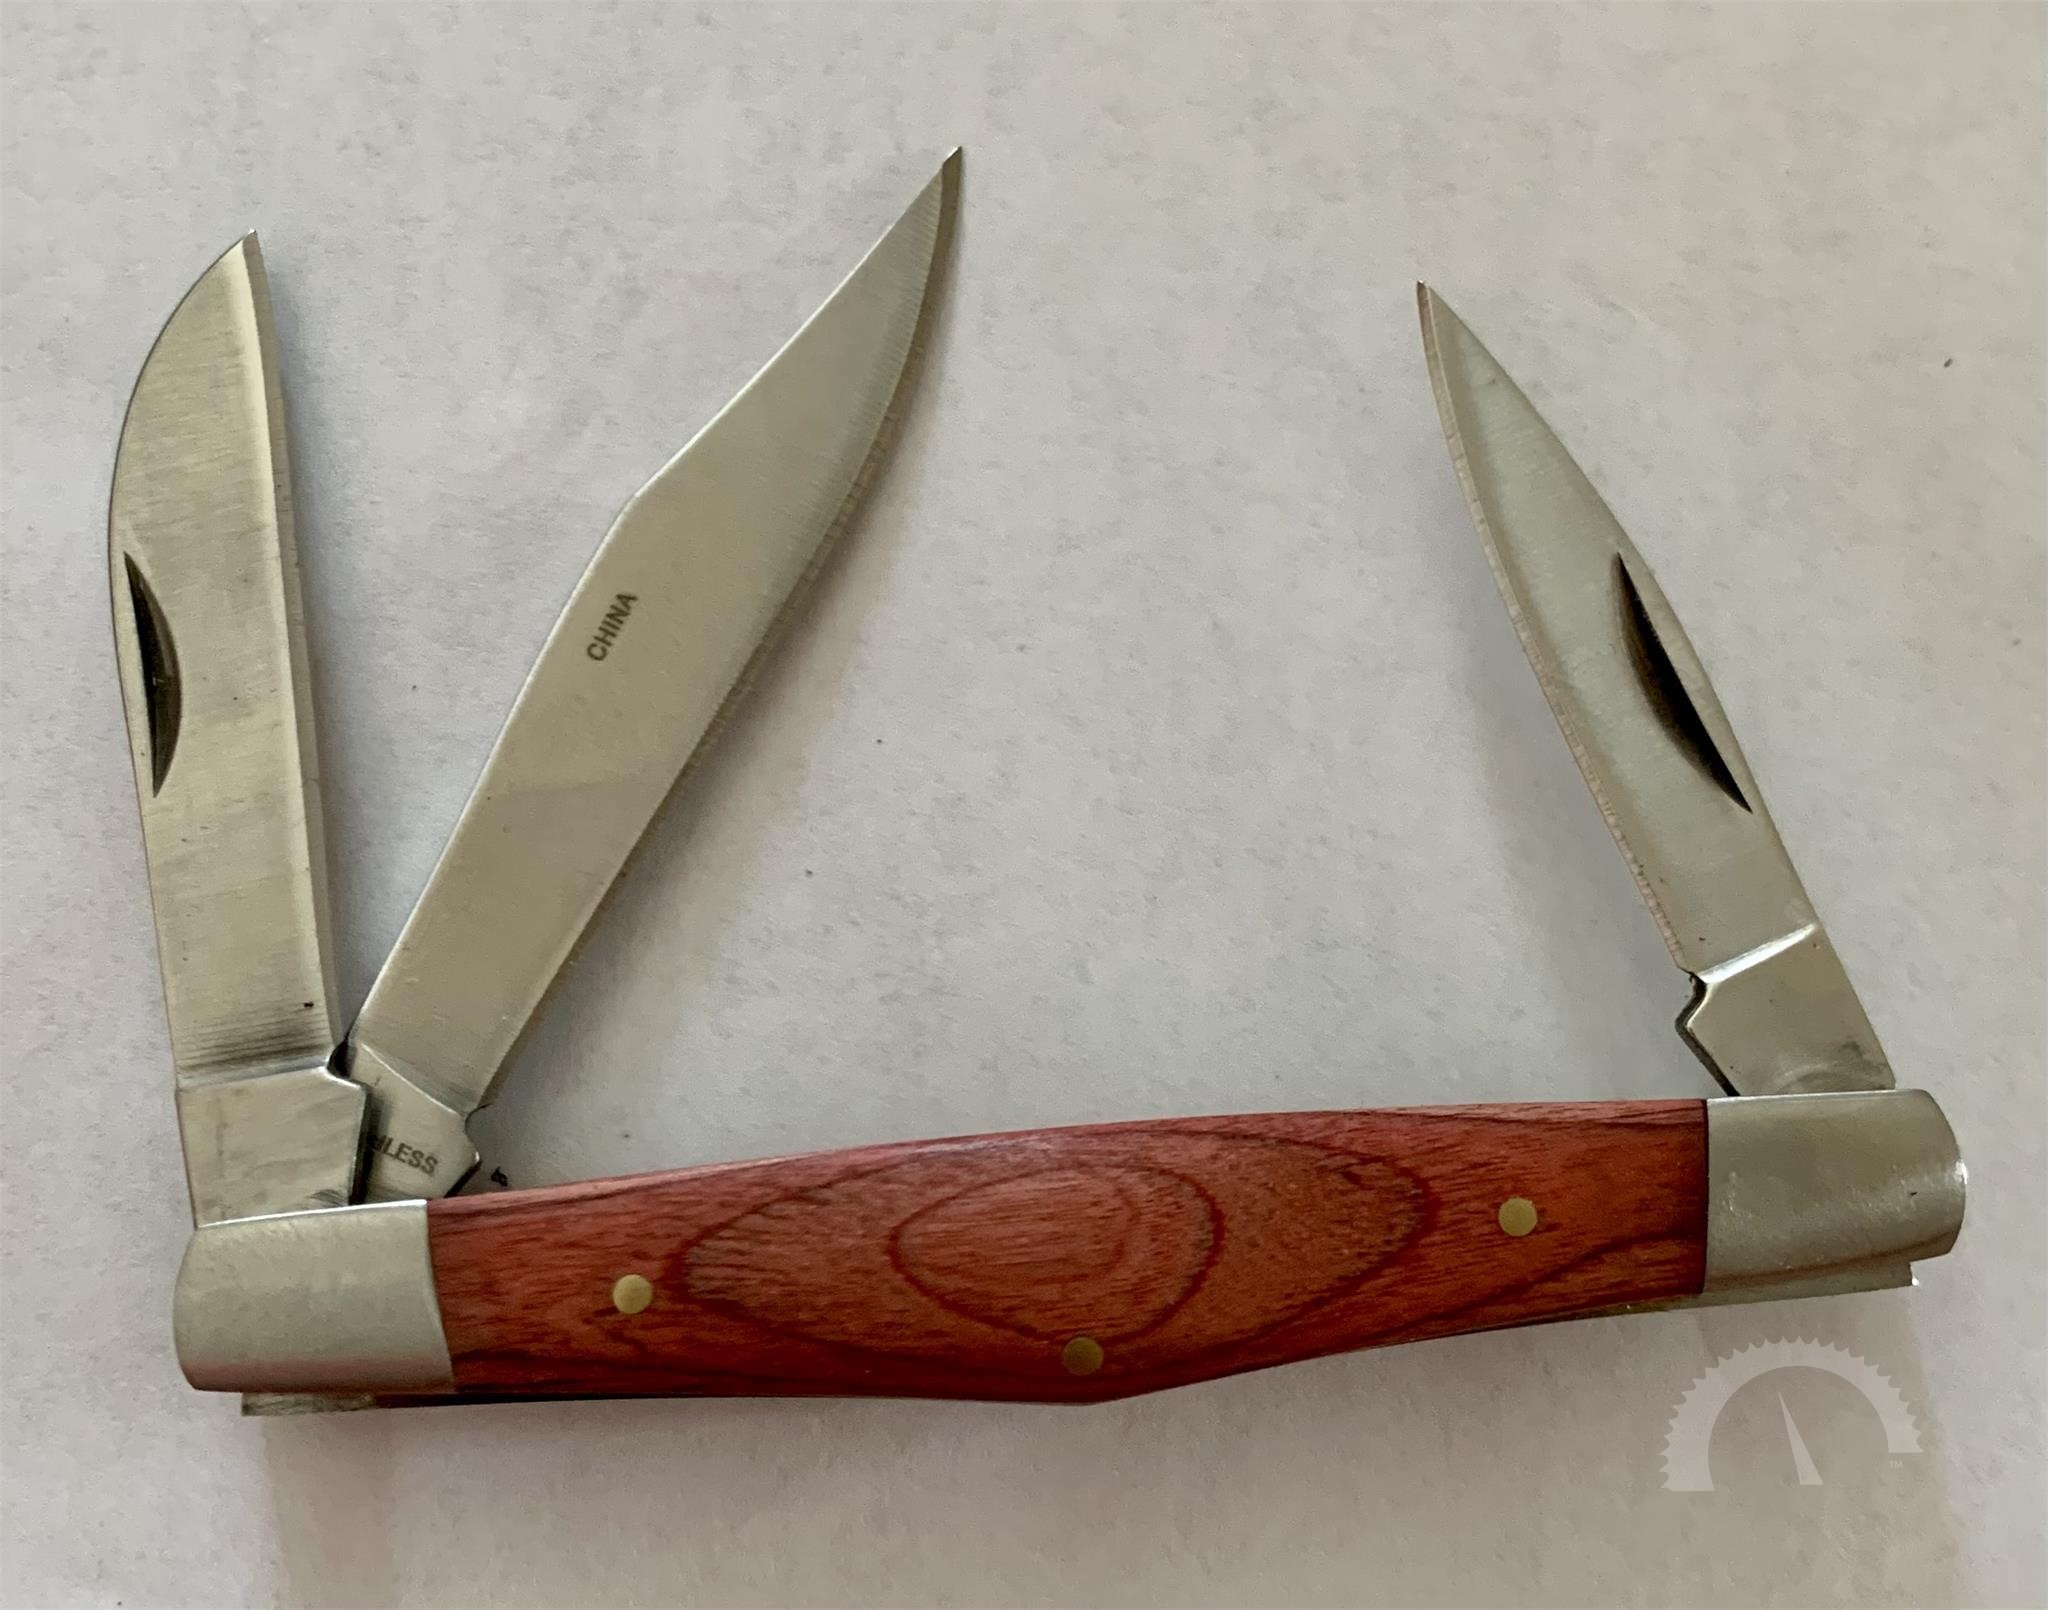 Sold at Auction: Miracle Blade Knife Set & Knife Block